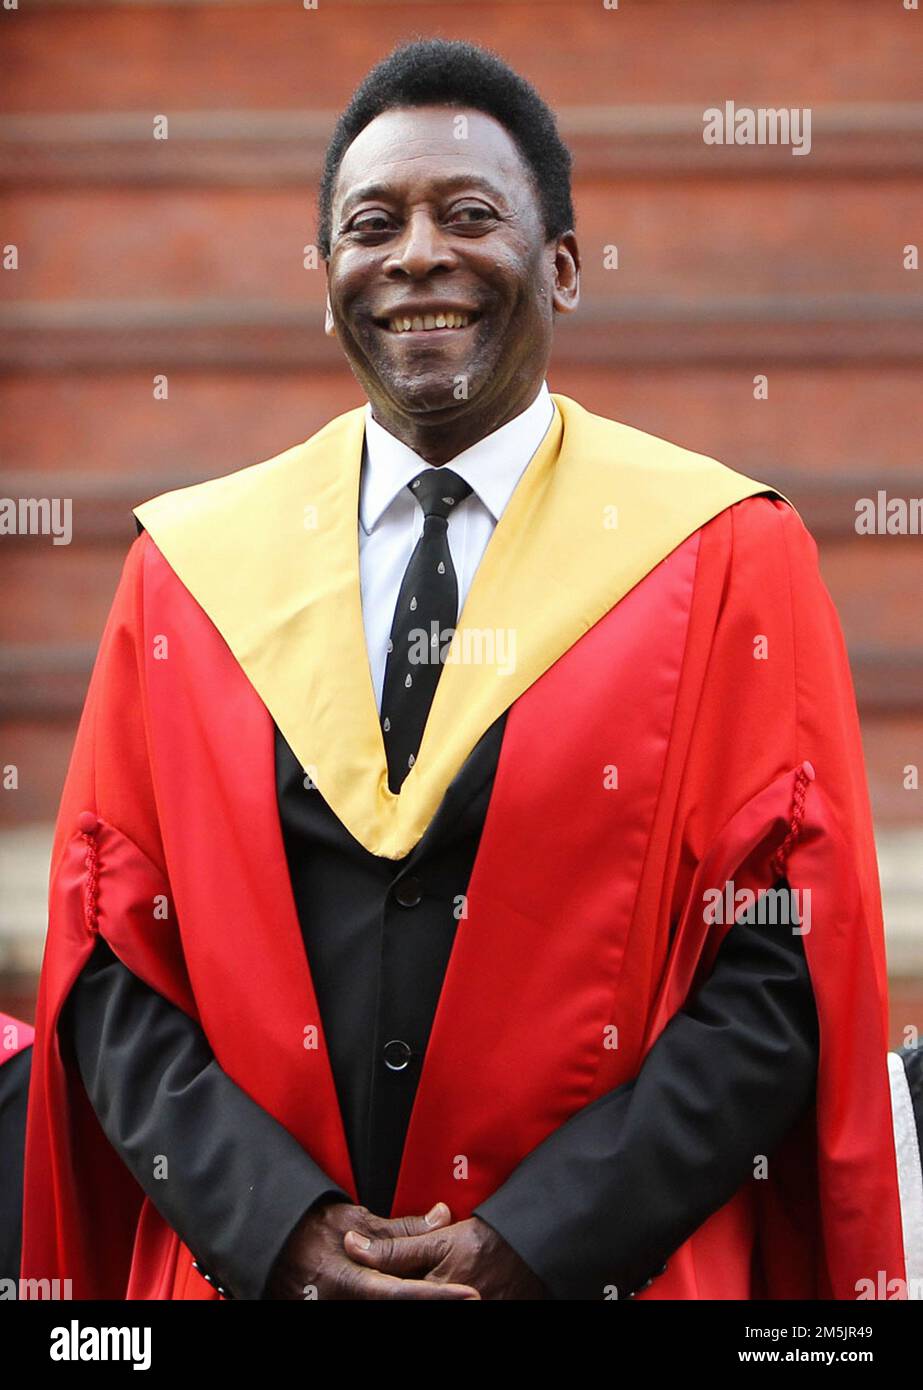 File photo dated 09-08-2012 of Former footballer Pele, who was presented with an honorary degree by the University of Edinburgh, at the Victoria and Albert Museum, London, ahead of the planned opening of a University of Edinburgh Office of the Americas. Brazil great Pele has died at the age of 82, his family have announced on social media. Issue date: Thursday December 29, 2022. Stock Photo